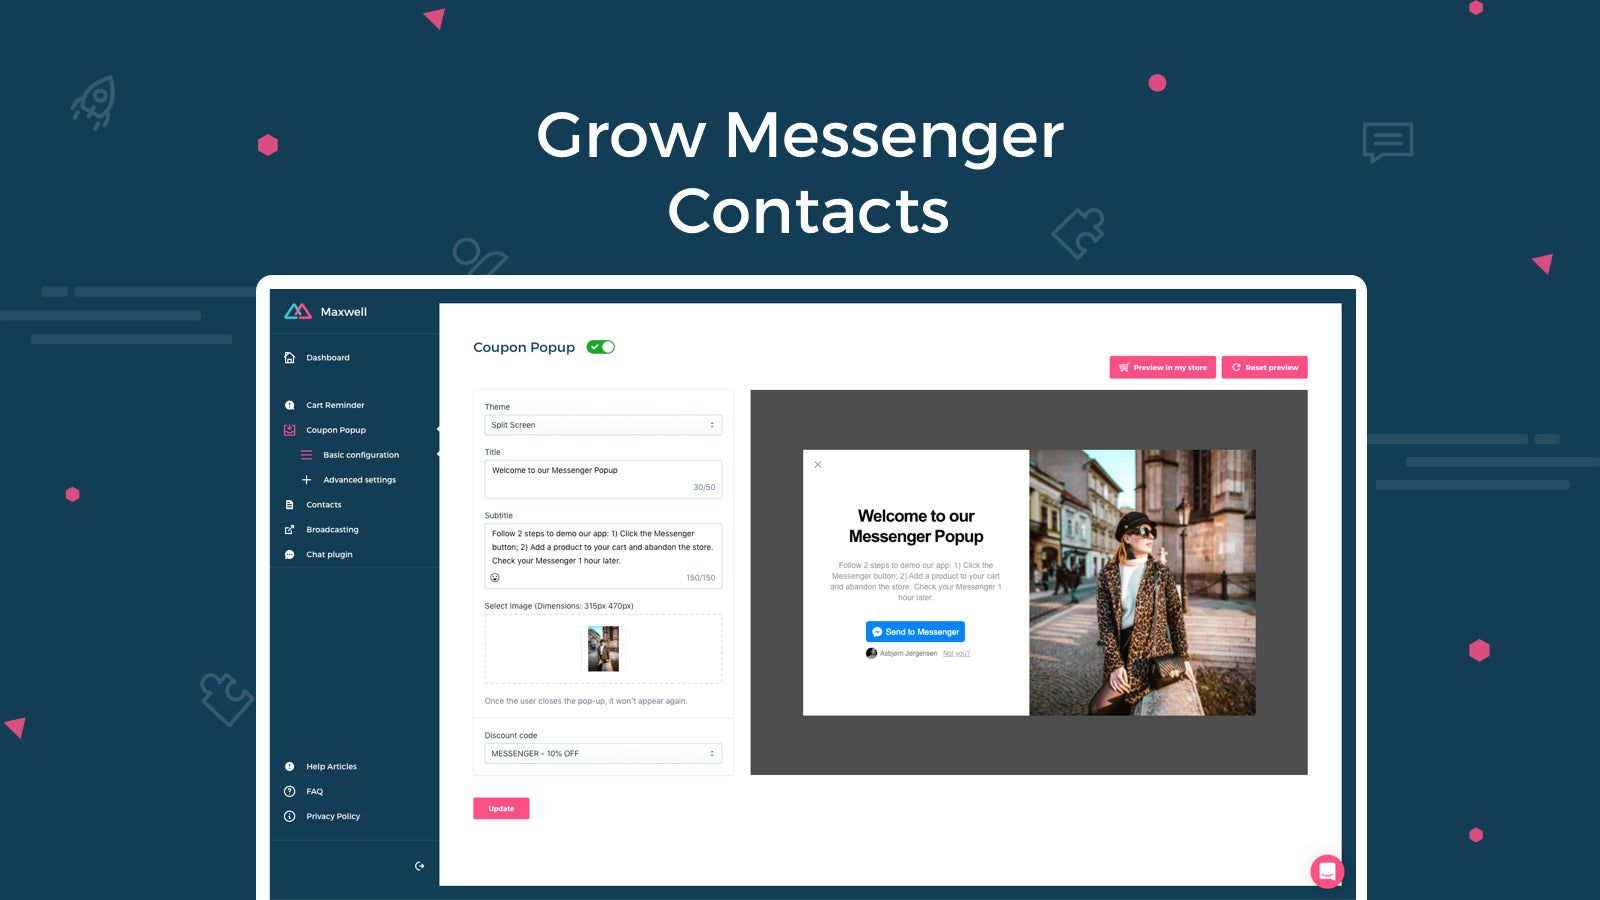 WhatsApp live chat & widgets to grow Messenger contacts